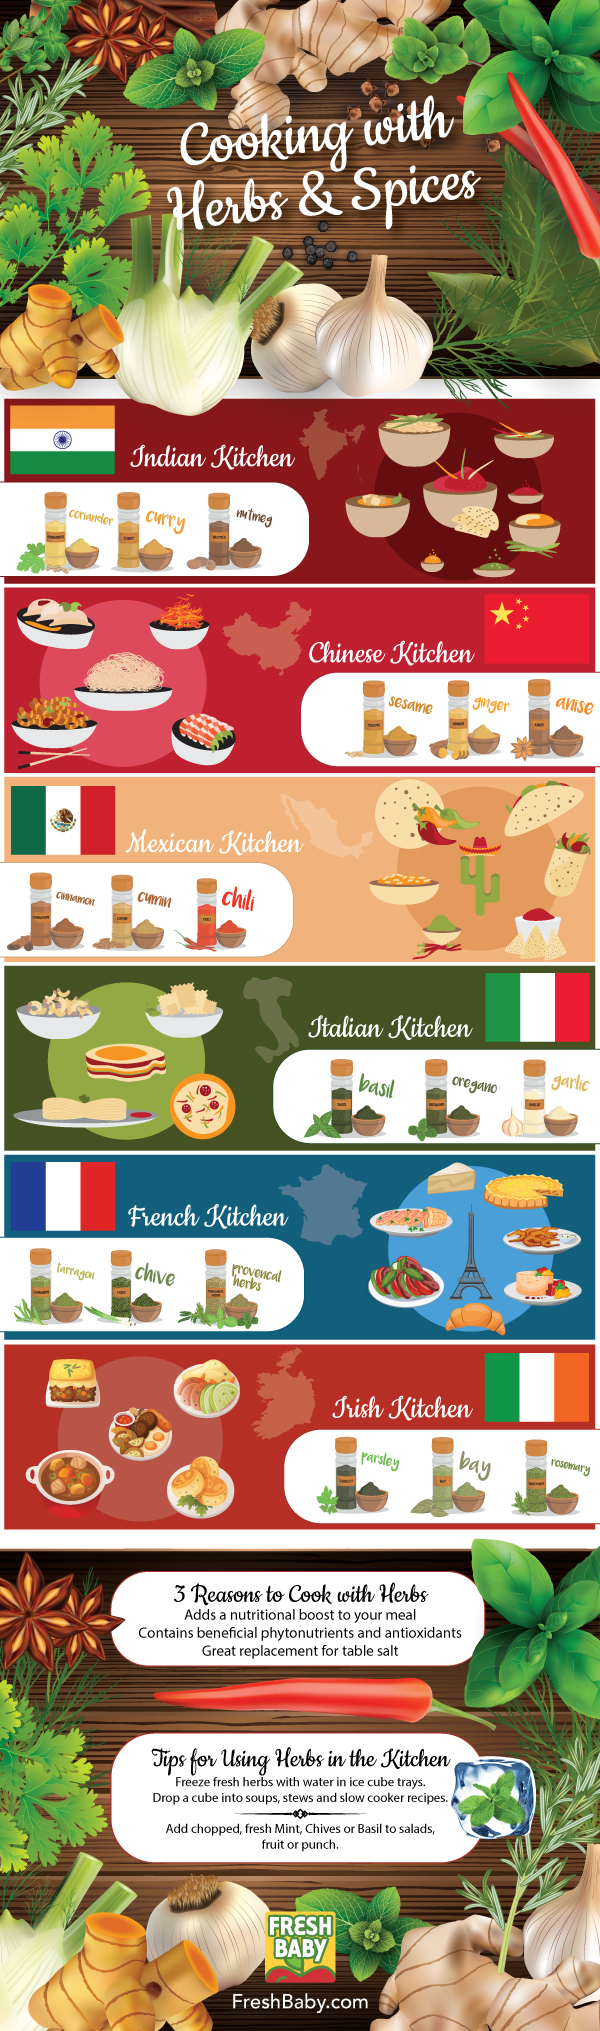 Cooking with Herbs and Spices Infographic